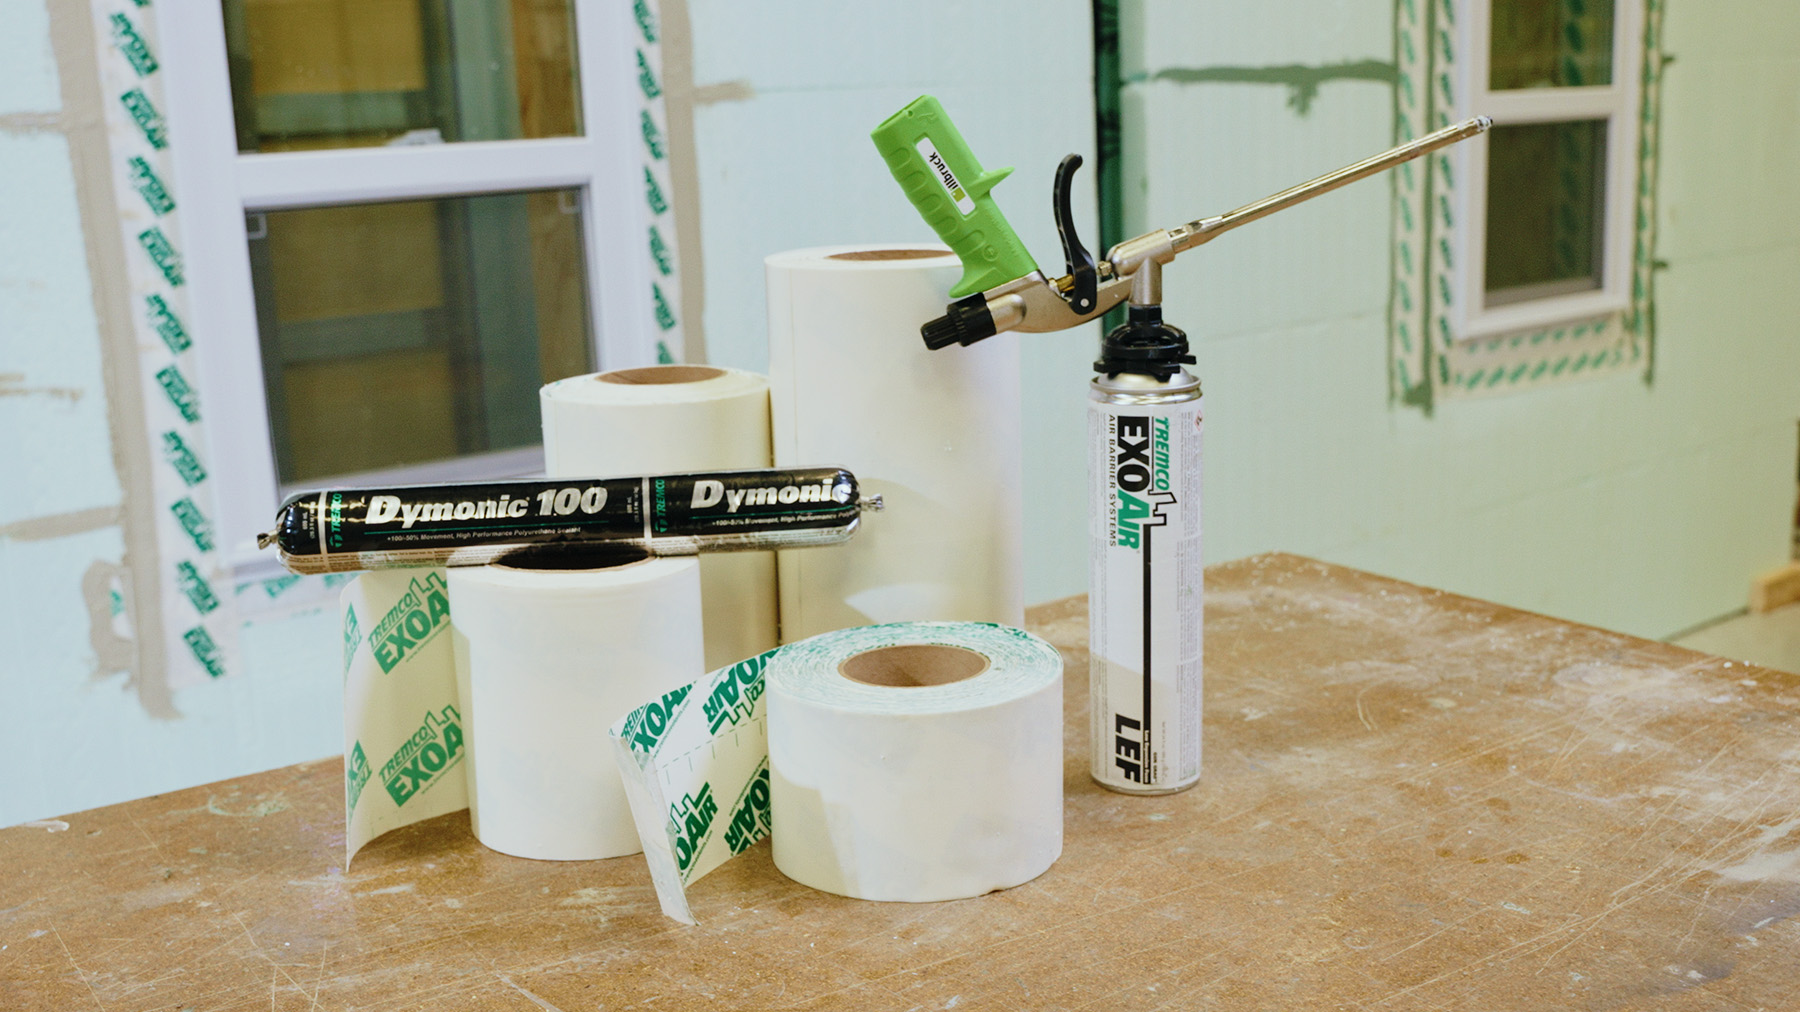 Collection of flashing products, including dymonic 100 sealant and air barrier